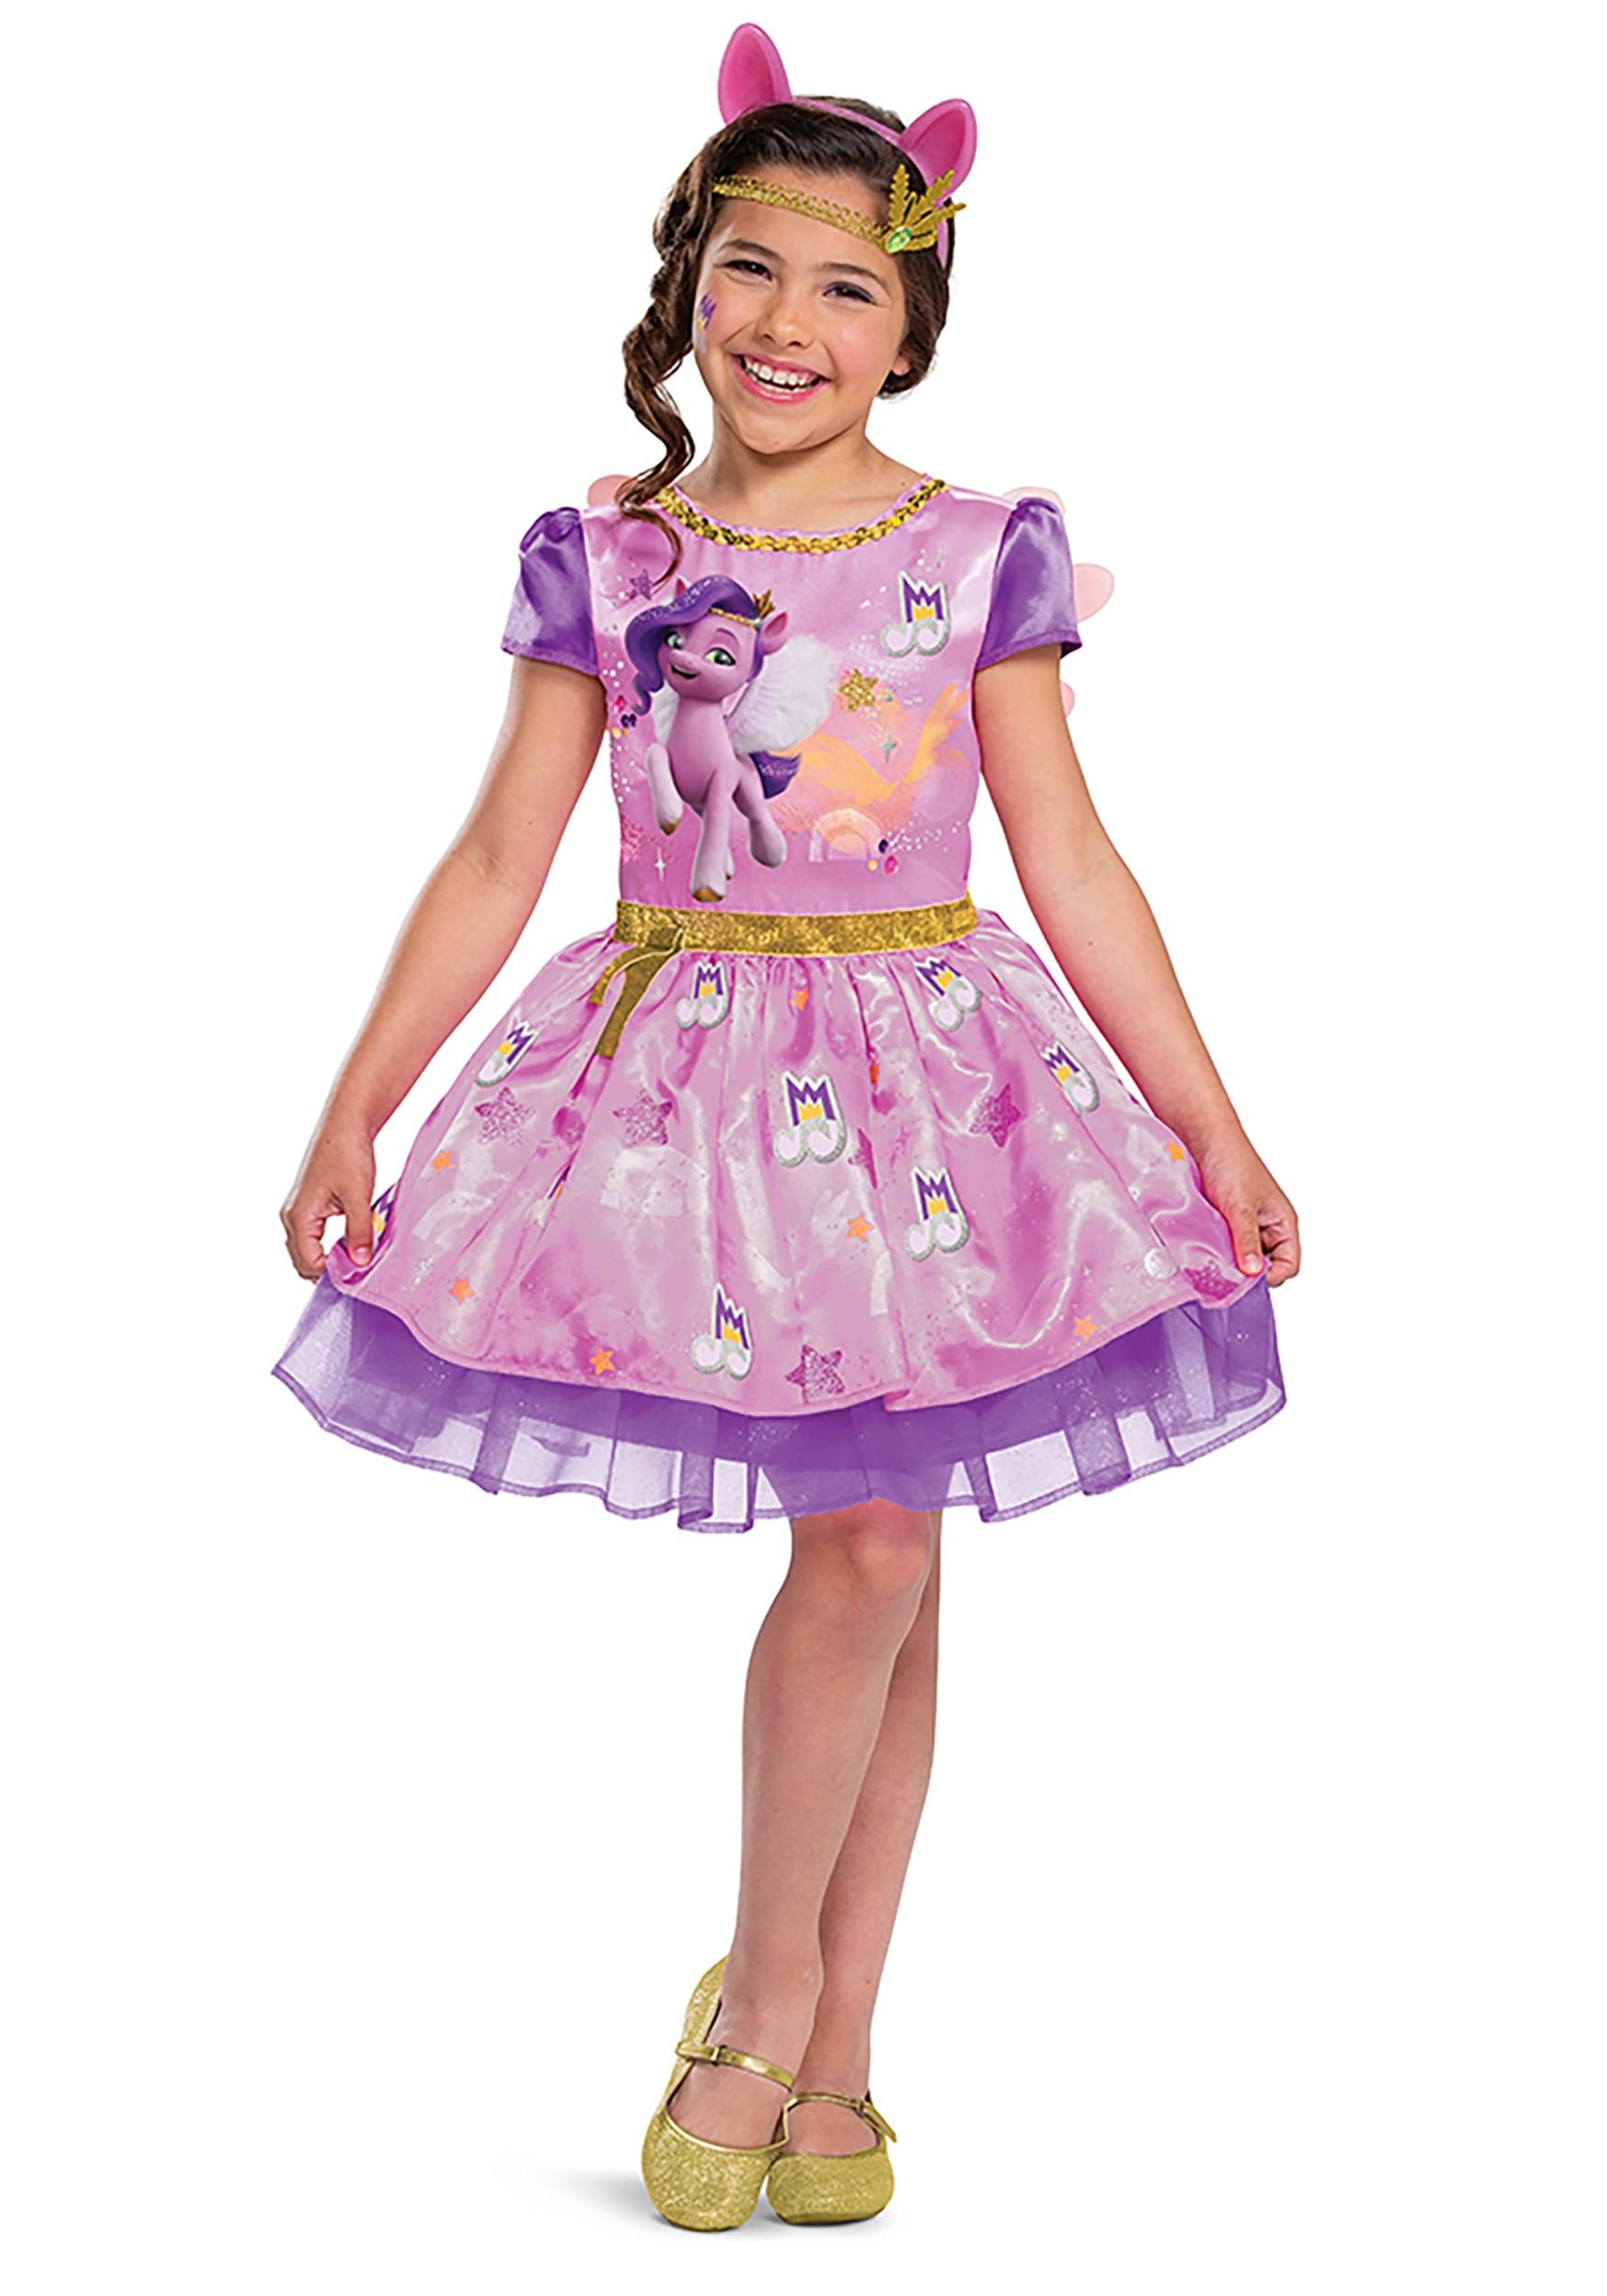 Photos - Fancy Dress KID Disguise 's/Toddler My Little Pony Pipp Petals Costume Pink/Purple 